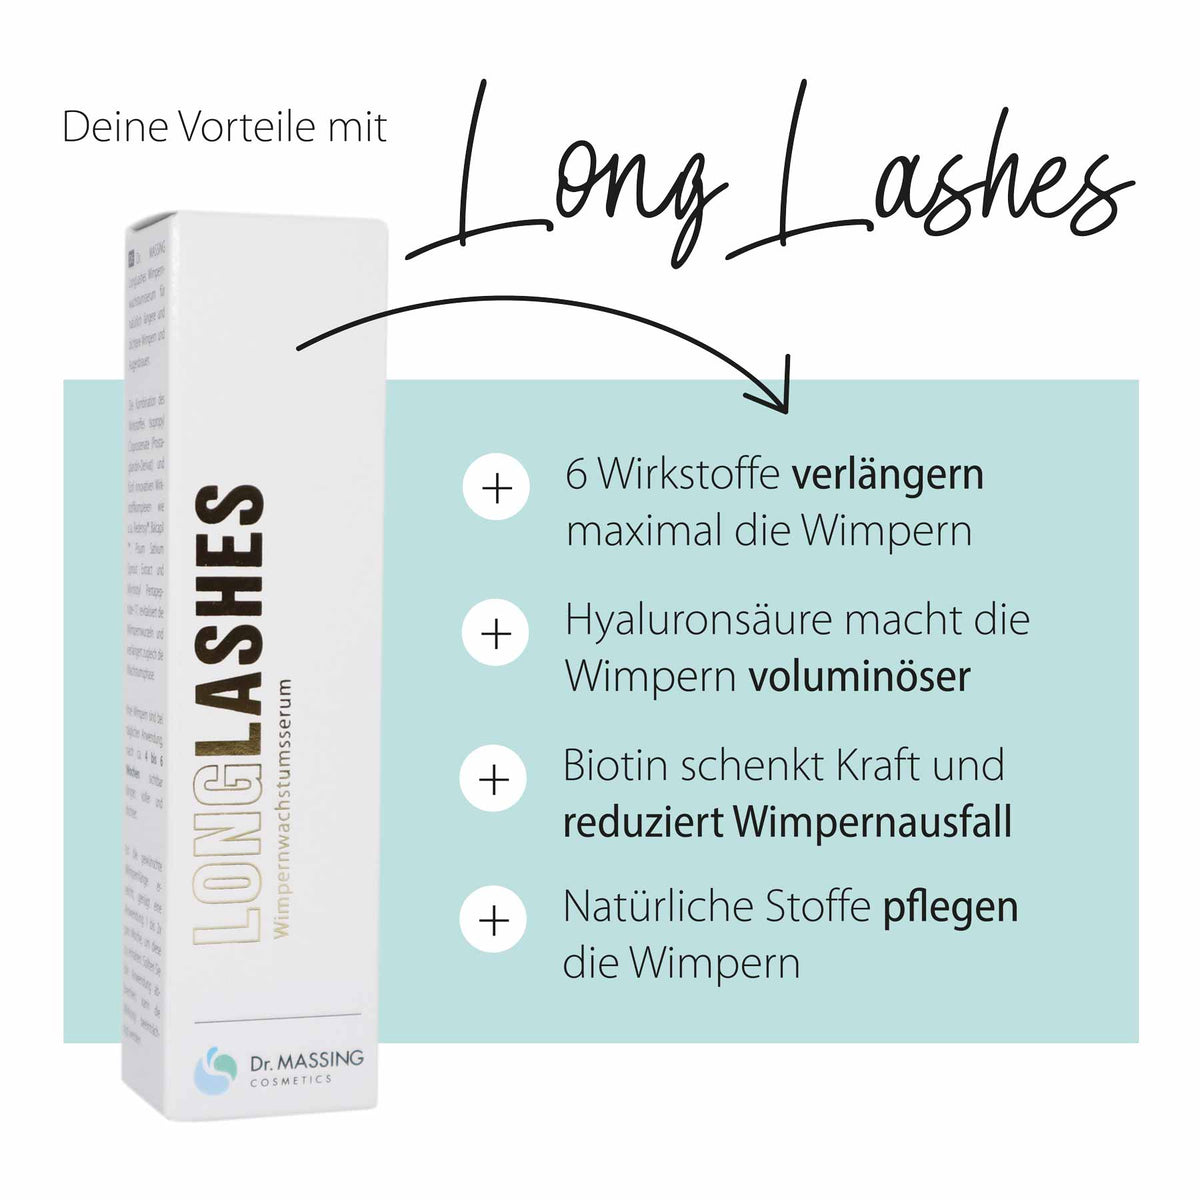 Long Lashes Wimpernserum